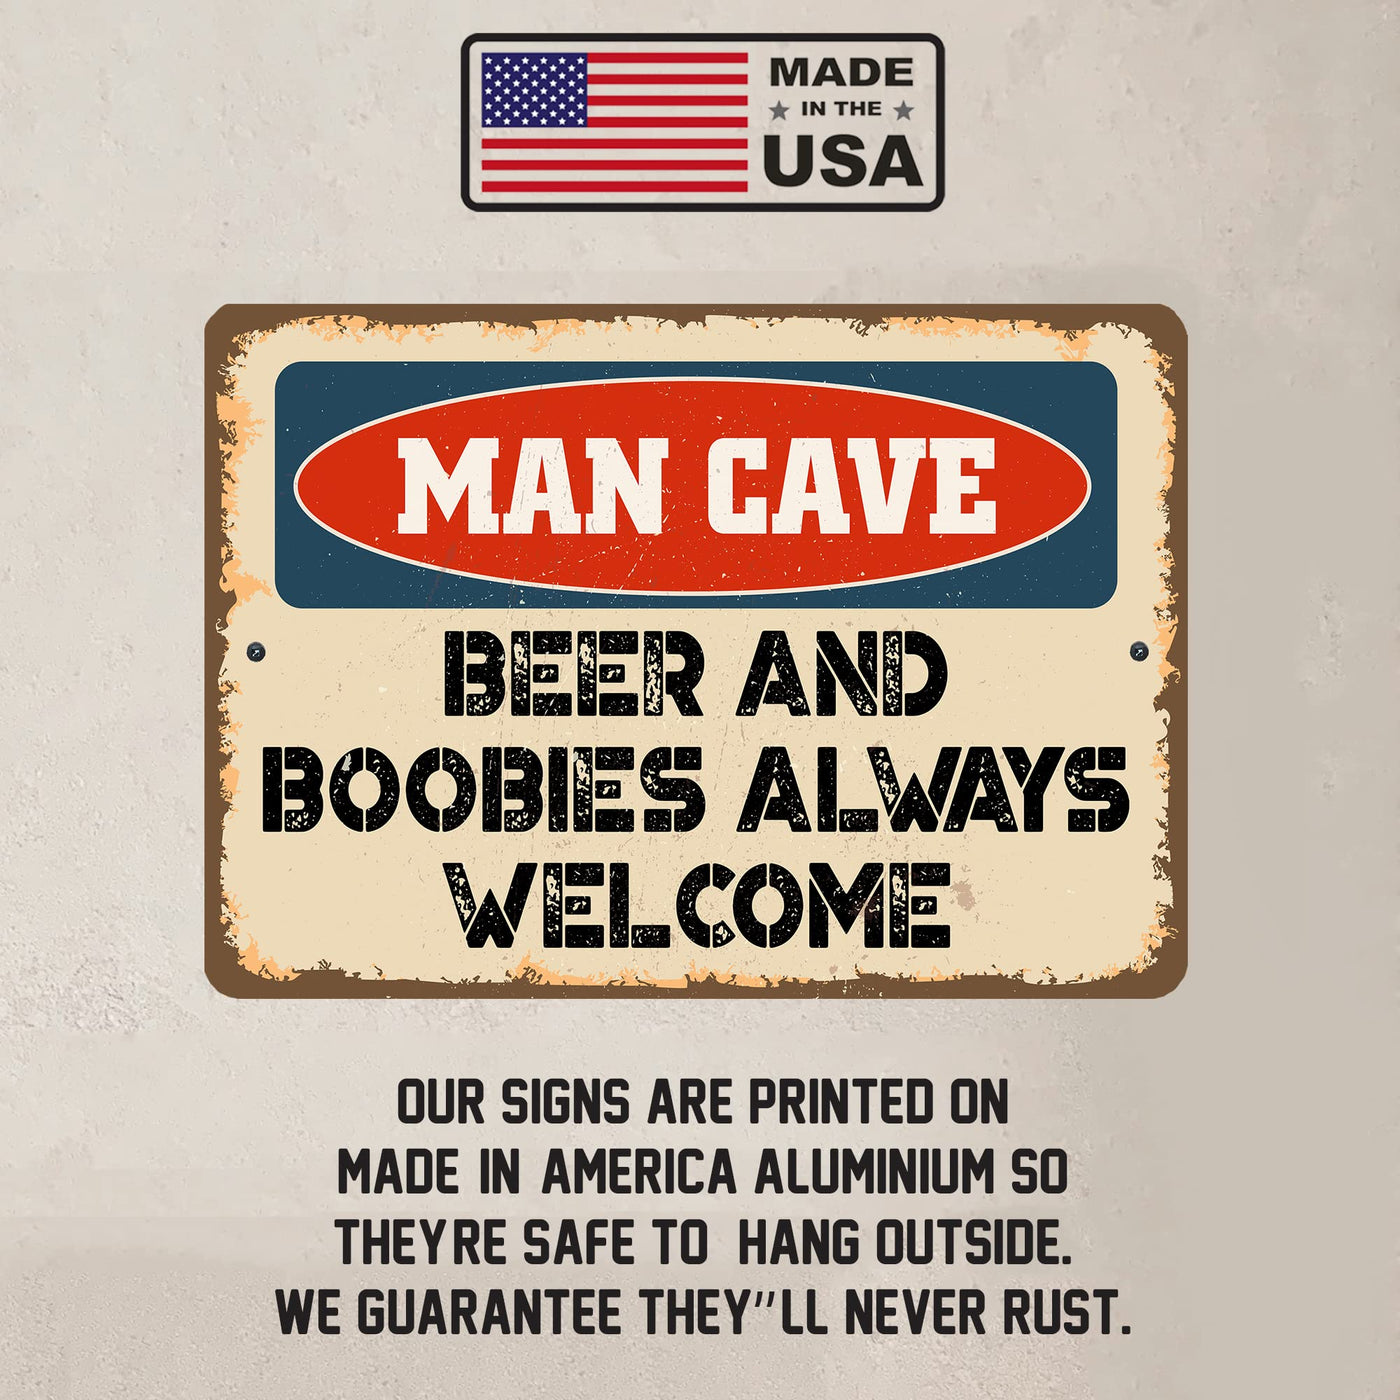 Man Cave - Beer Always Welcome Metal Wall Art Vintage Sign -12 x 8" Funny Retro Beer & Alcohol Sign for Bar, Cave, Garage, Pub- Rustic Tin Outdoors Sign for Home-Kitchen-Patio-Beach House Decor!